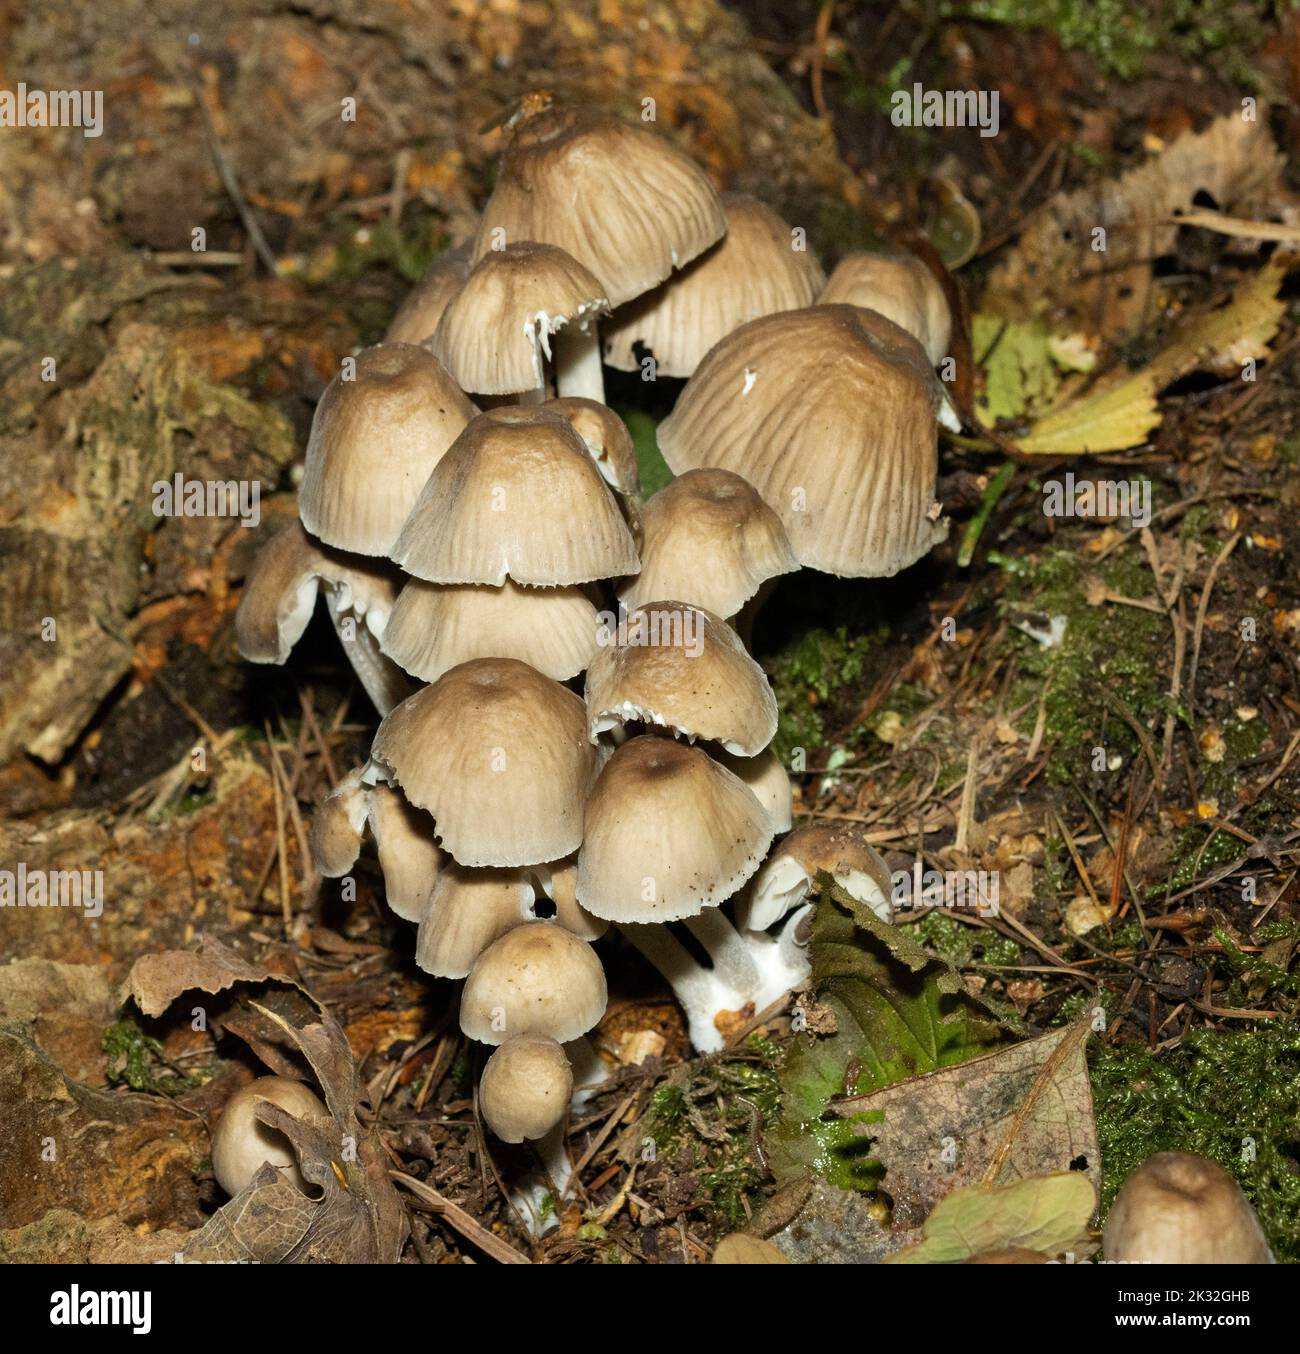 One of the commonest of the delicate Bonnet Fungus family, the Common Bonnet has a striated cap. The base of the stipe often has a woolly root base Stock Photo